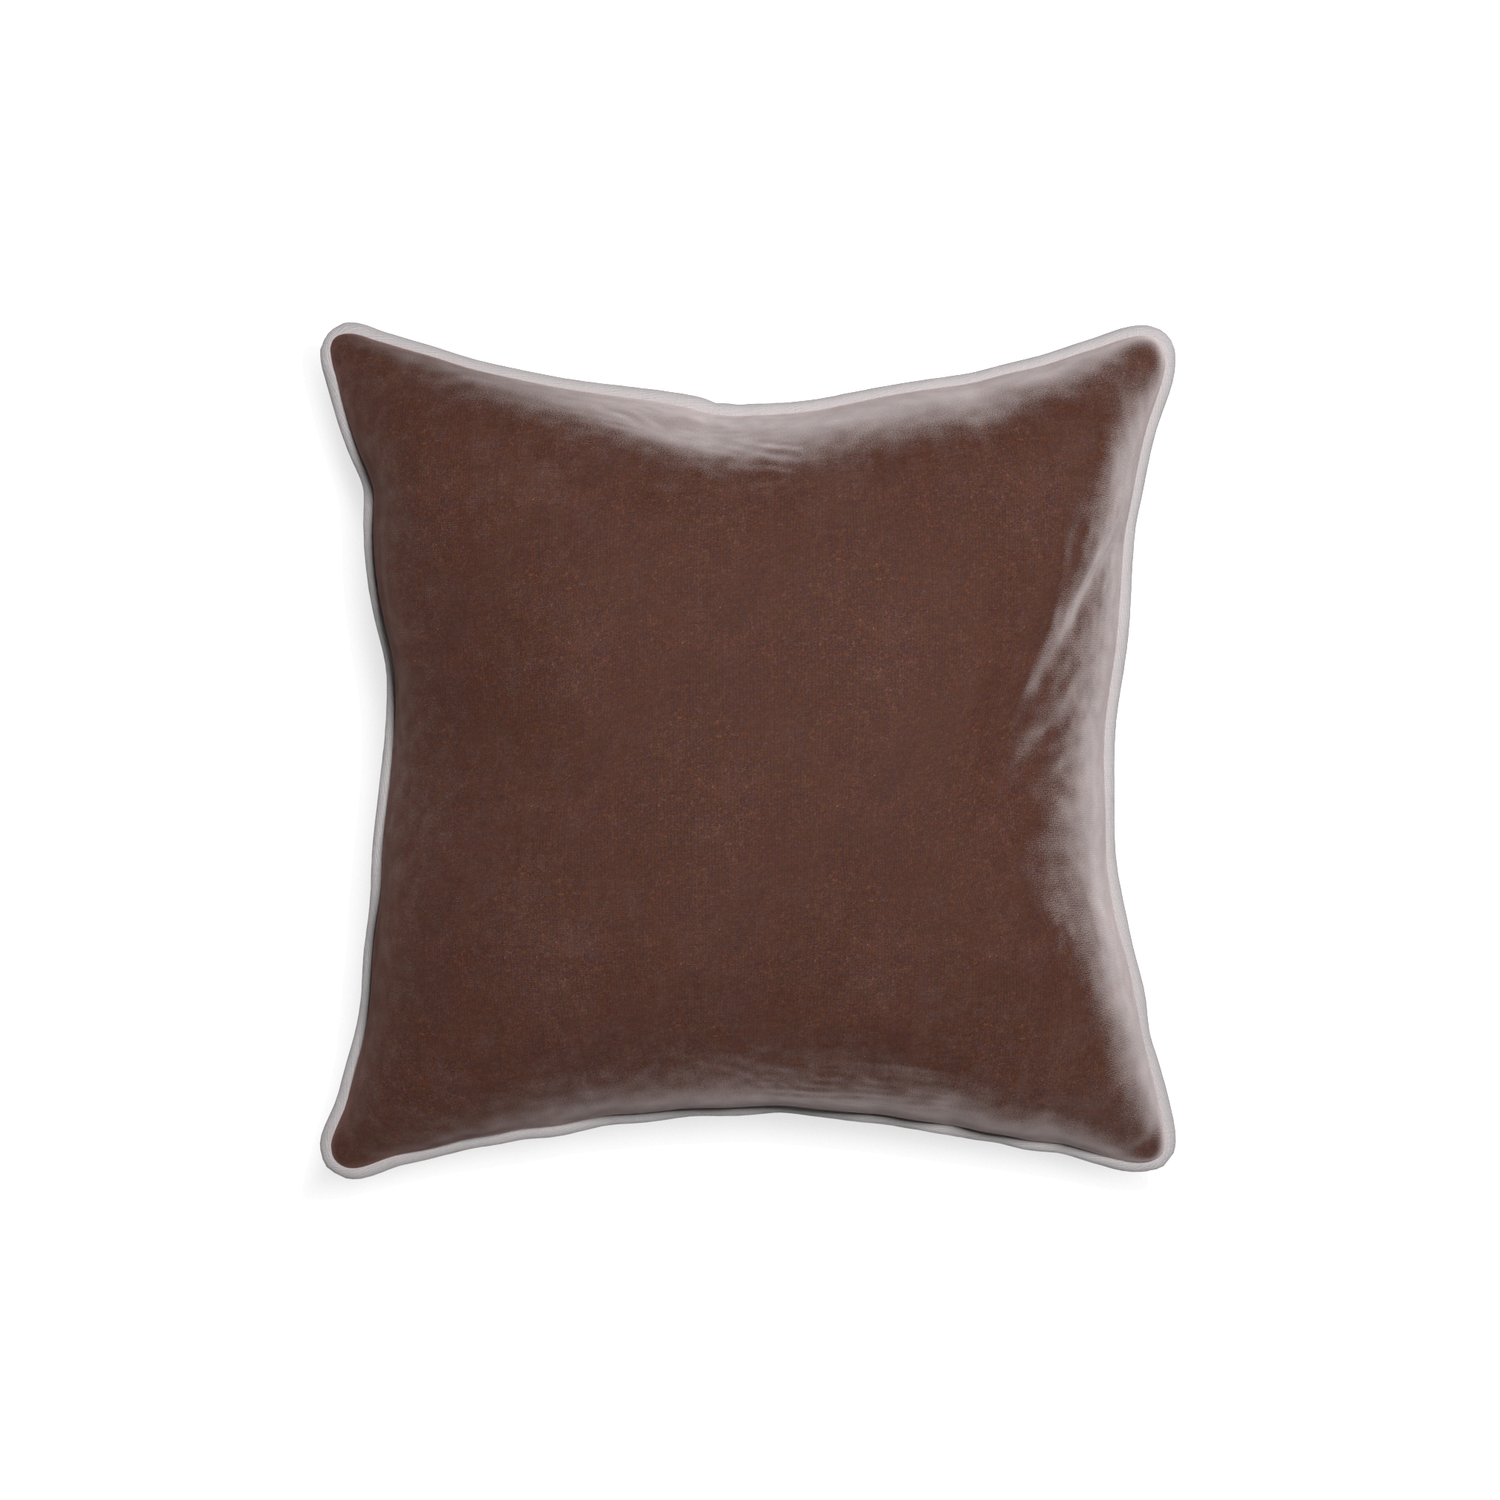 18-square walnut velvet custom pillow with pebble piping on white background